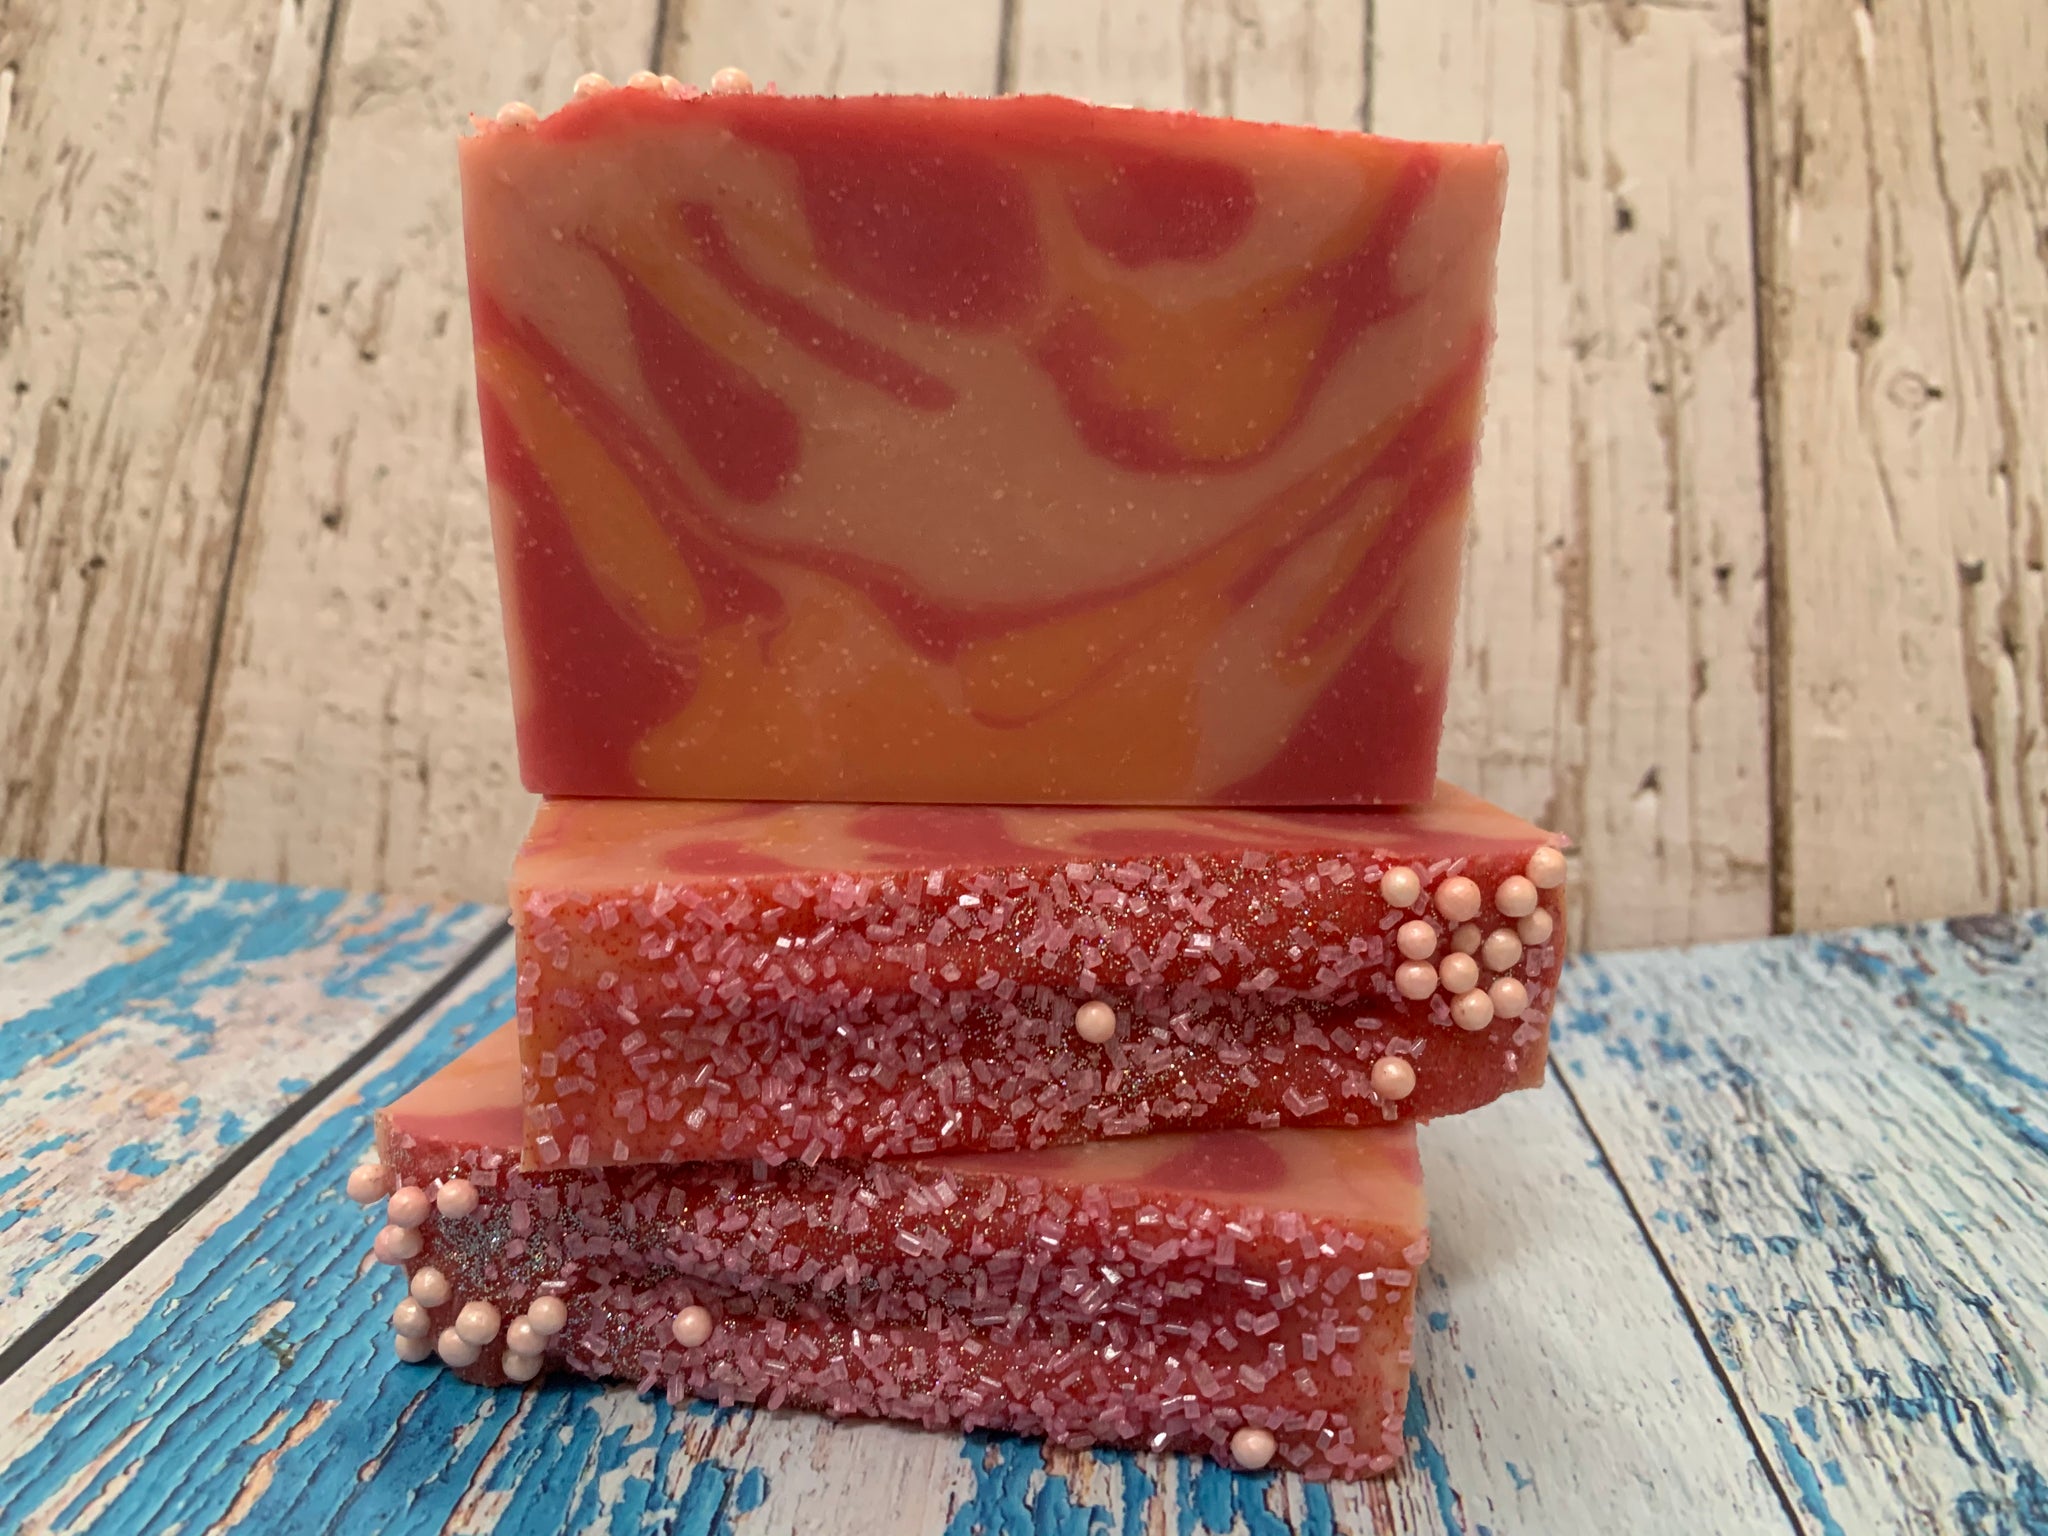 craft seltzer soap handmade in texas with sparkly boi: cotton candy seltzer from ingenious brewing company humble texas craft brewery pink and orange craft seltzer soap for her spunkndisorderly